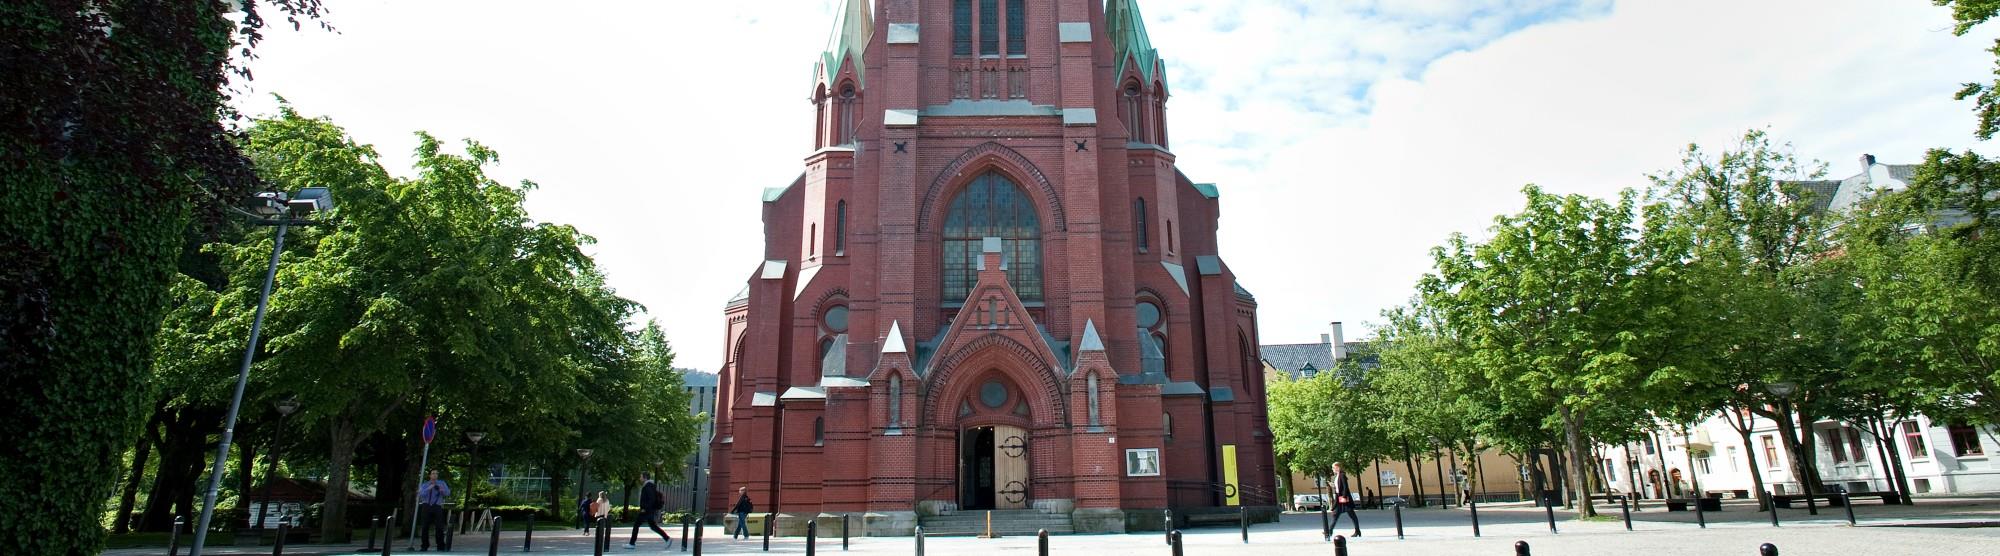 Bergen has many churches worth visiting